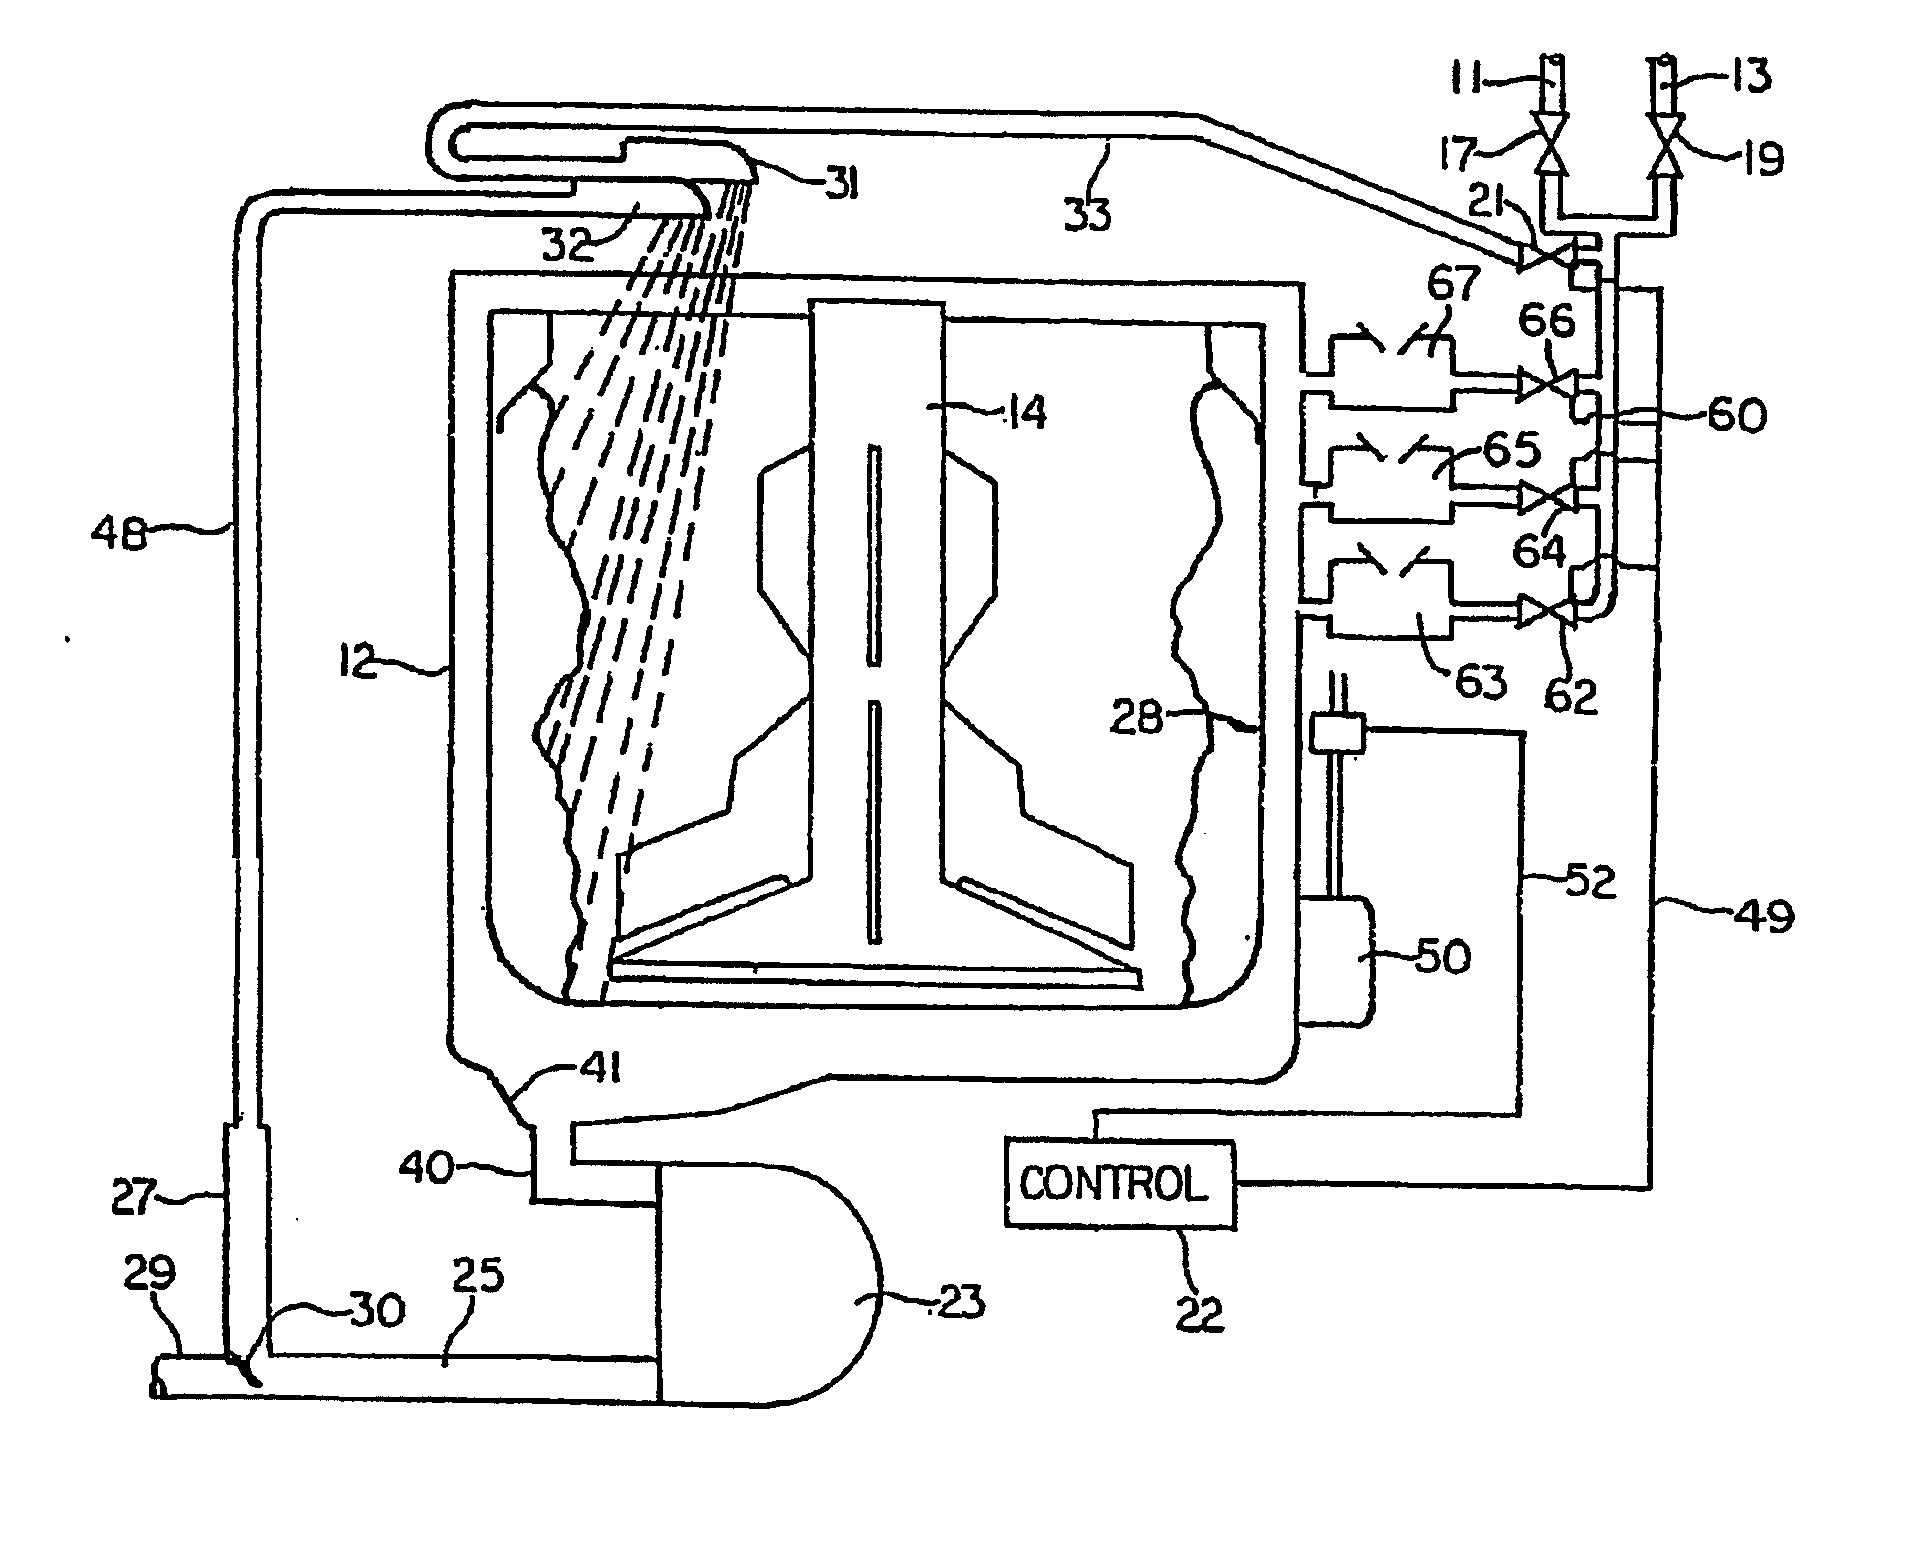 Stain removal process control method using BPM motor feedback